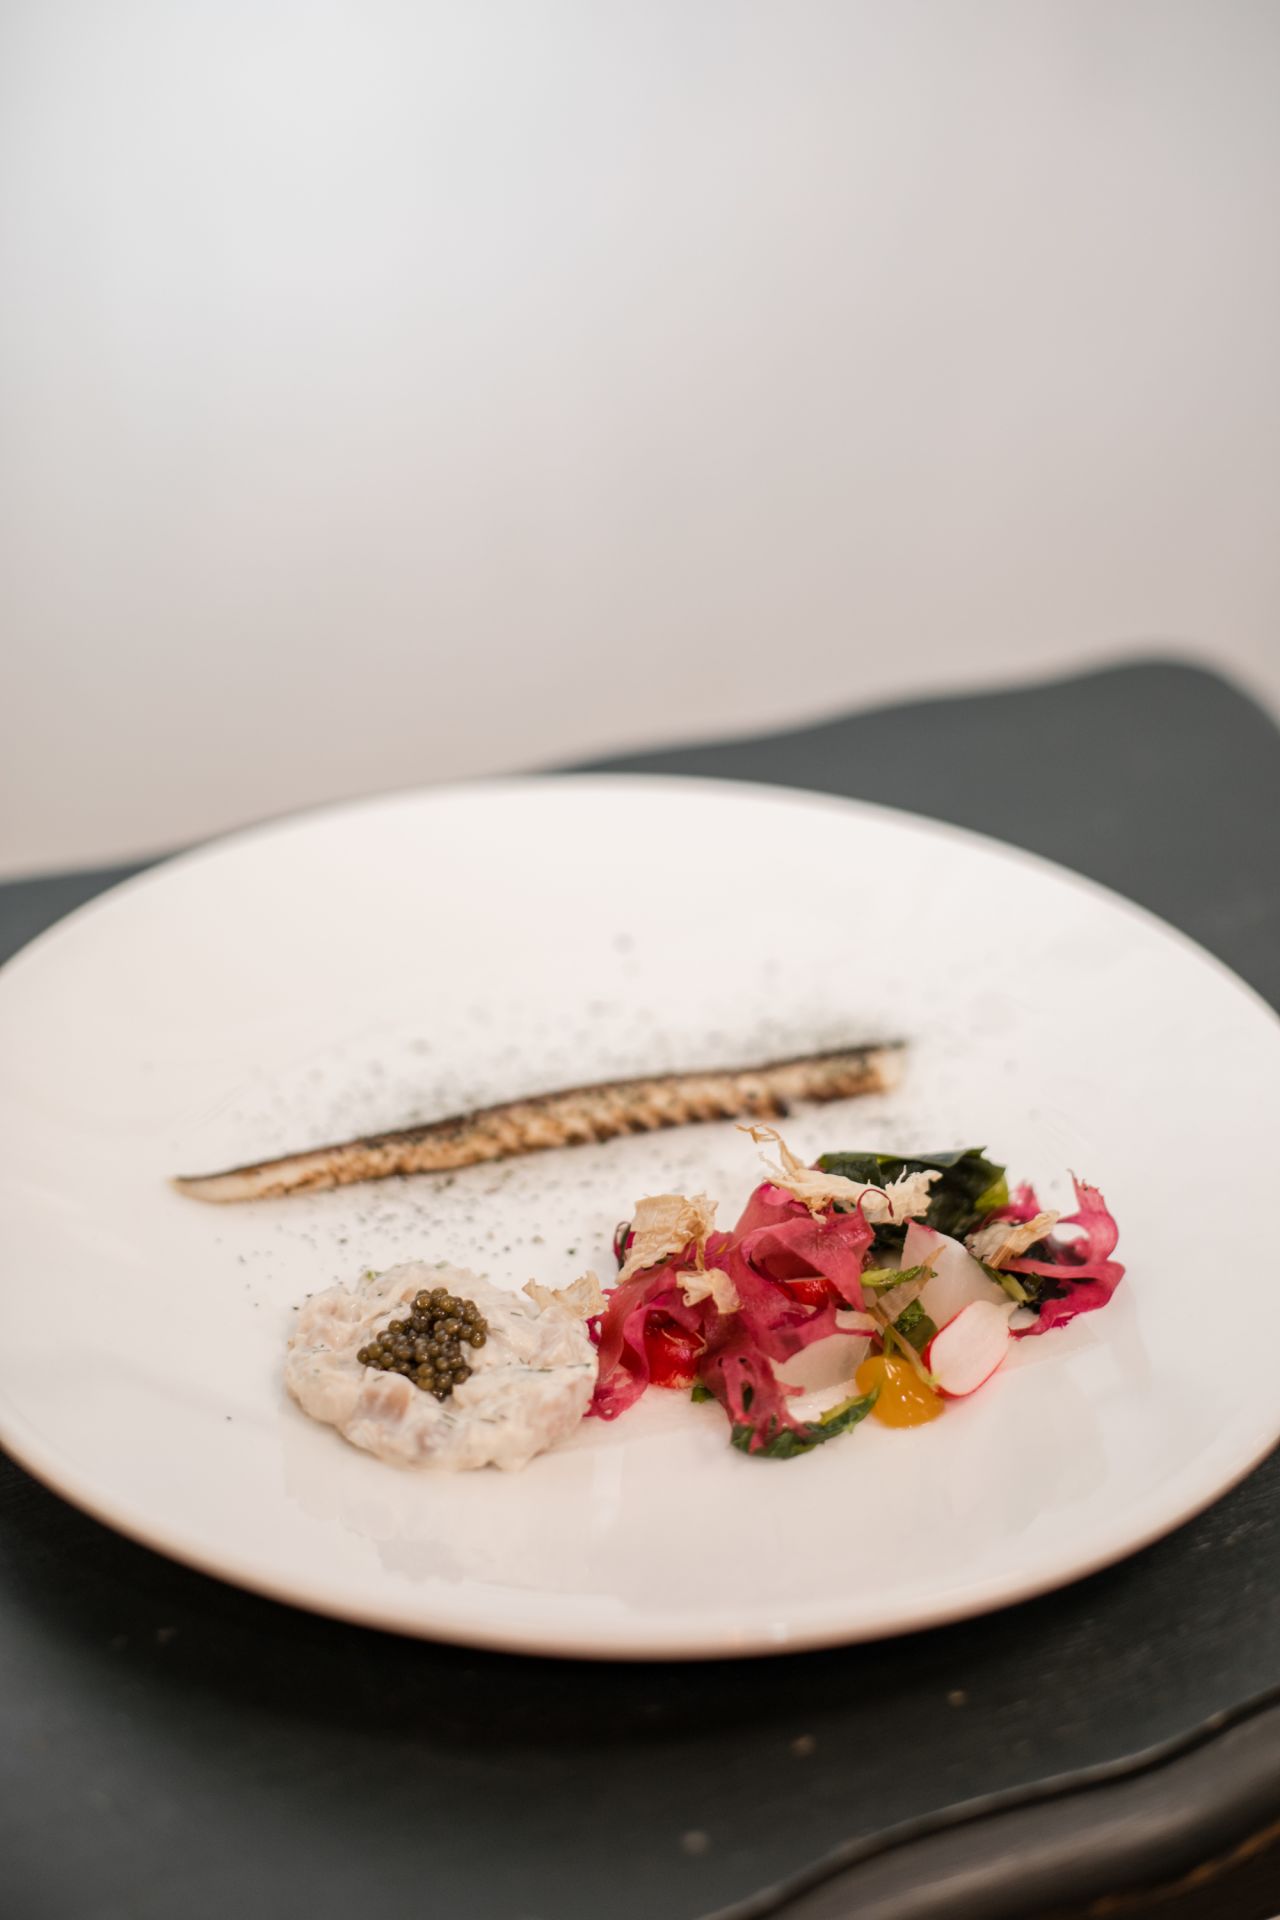 Among Blanc's treats are scorched mackerel, horseradish tartare and pickled vegetables.